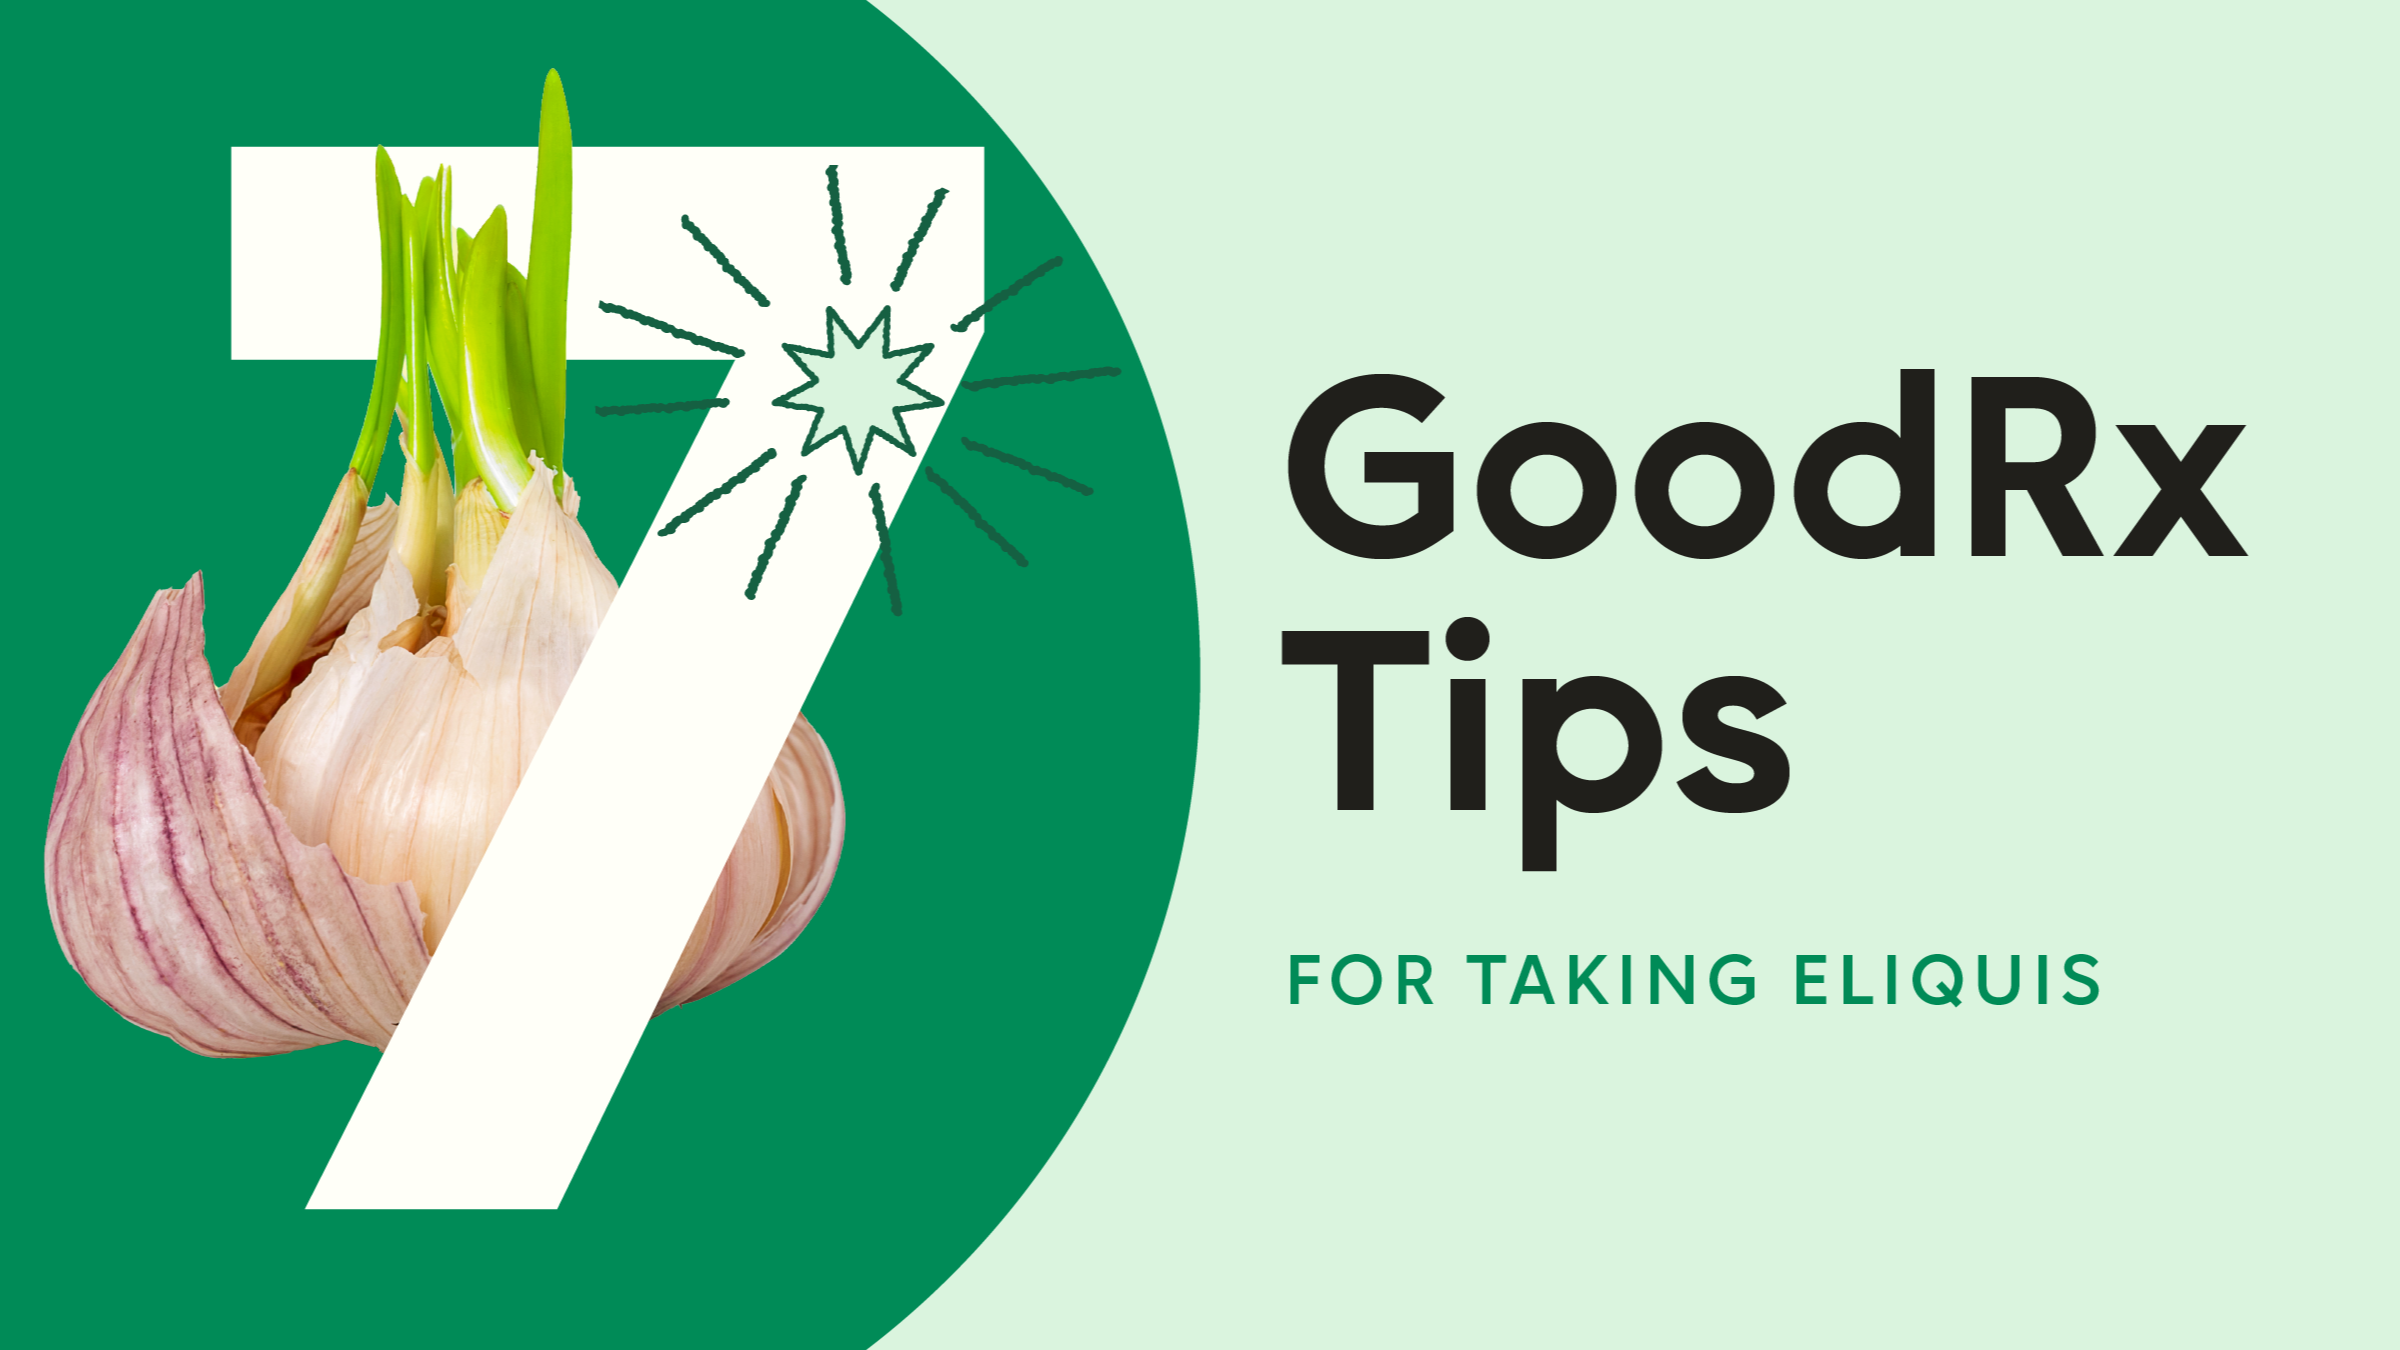 What You Need to Know When Taking Eliquis GoodRx